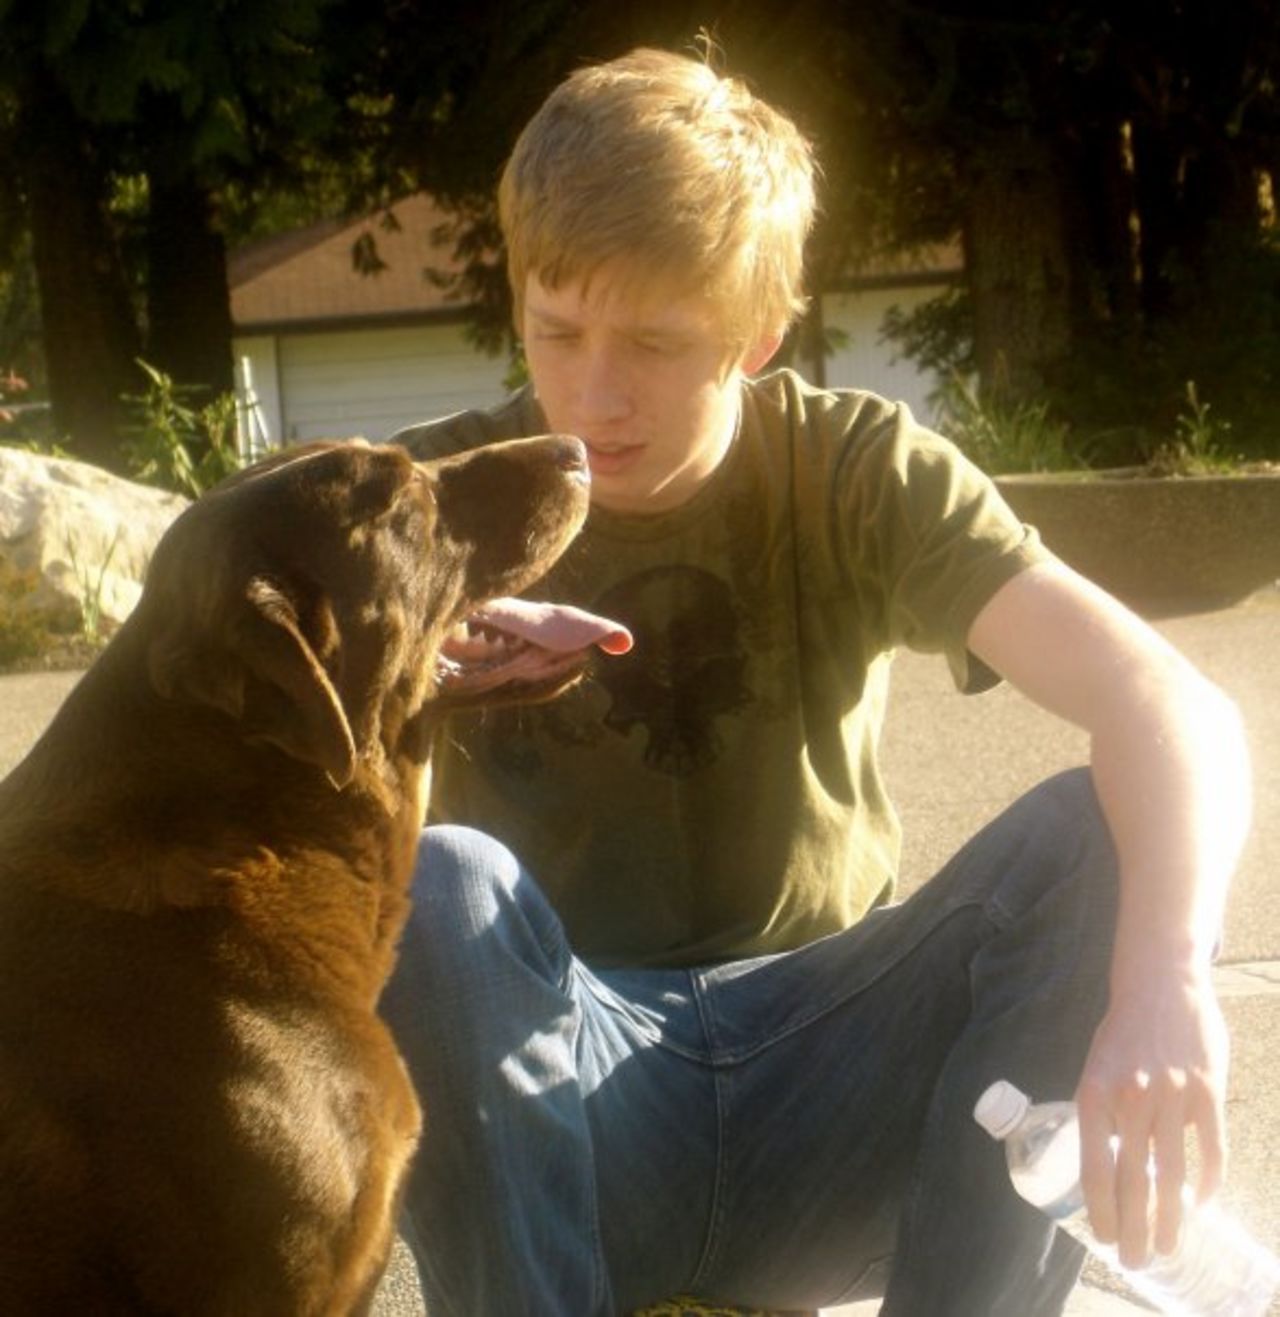 Evan with his dog Koby in 2009, when Evan moved back home from college so the family could better take care of him. After Evan's death, Koby got very sick and died less than a year later. "It was a helpless feeling to watch the dog suffer and was somewhat of a reminder of Evan's suffering and our inability to help him," Schwantner said.